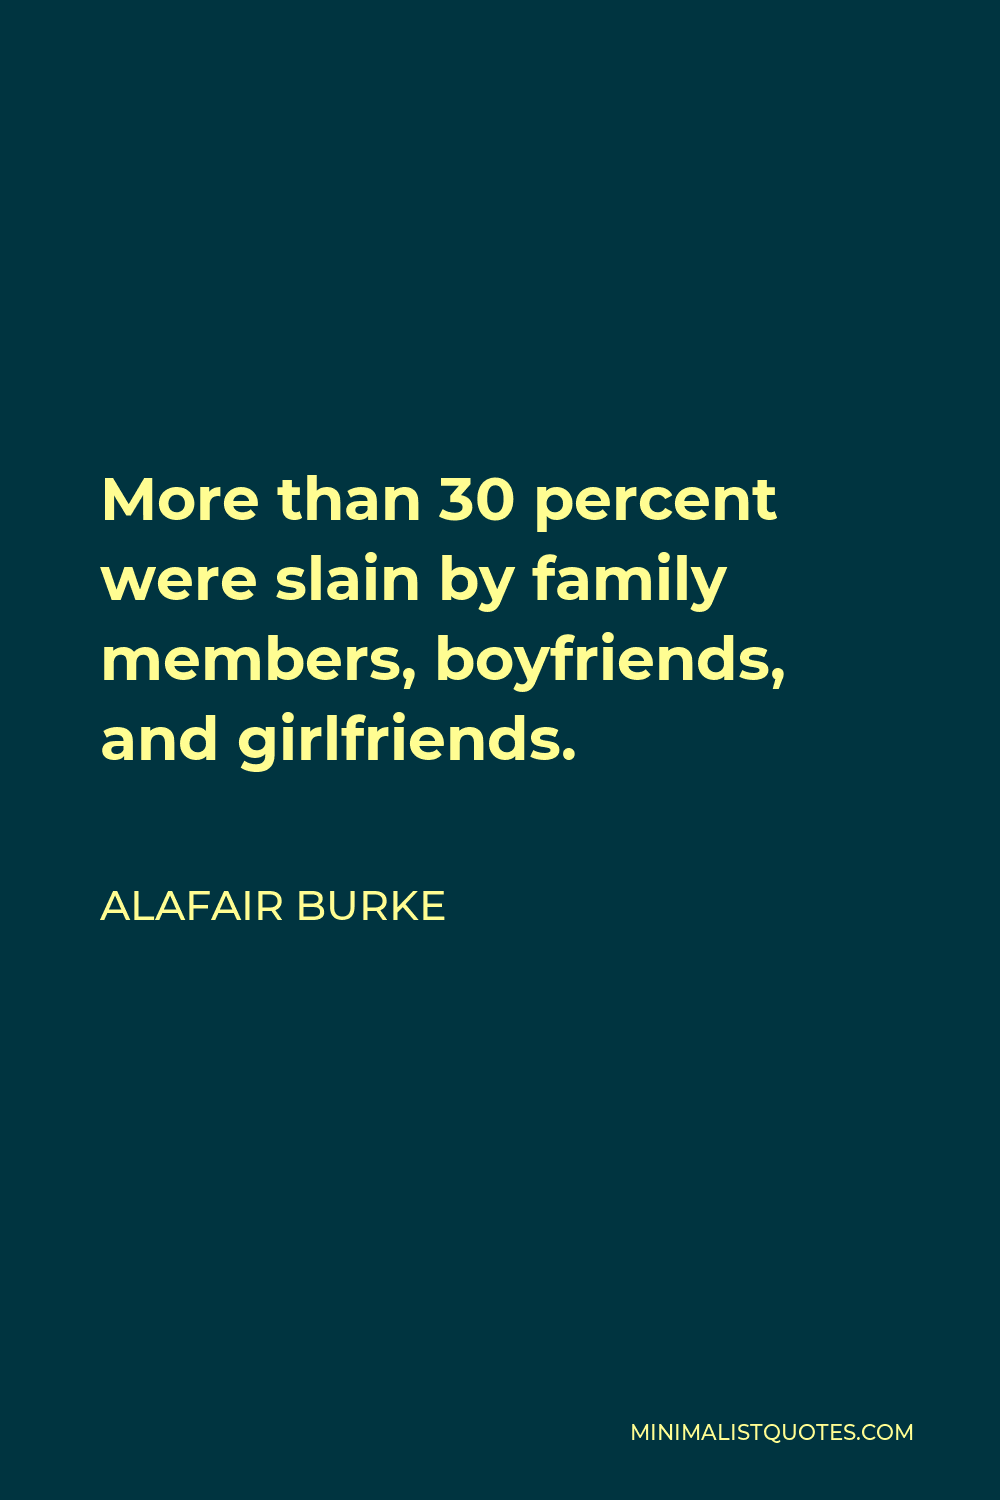 Alafair Burke Quote - More than 30 percent were slain by family members, boyfriends, and girlfriends.